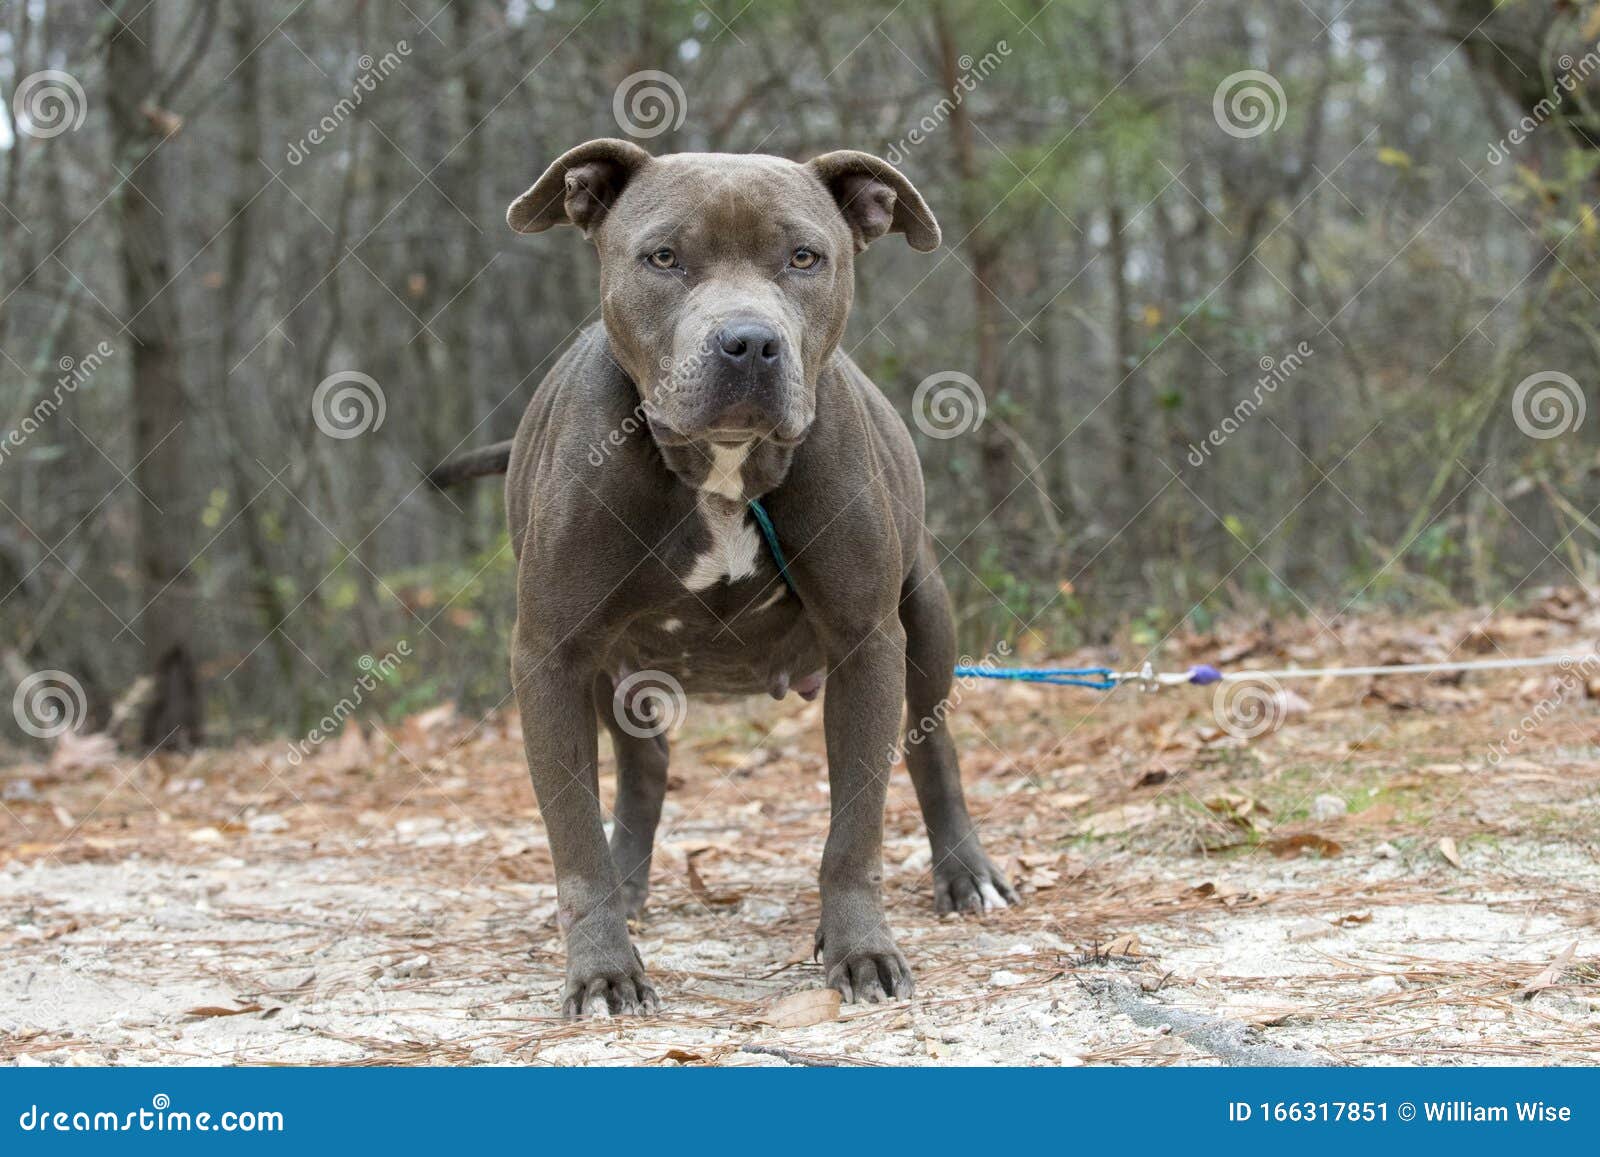 can a pitbull be an outside dog